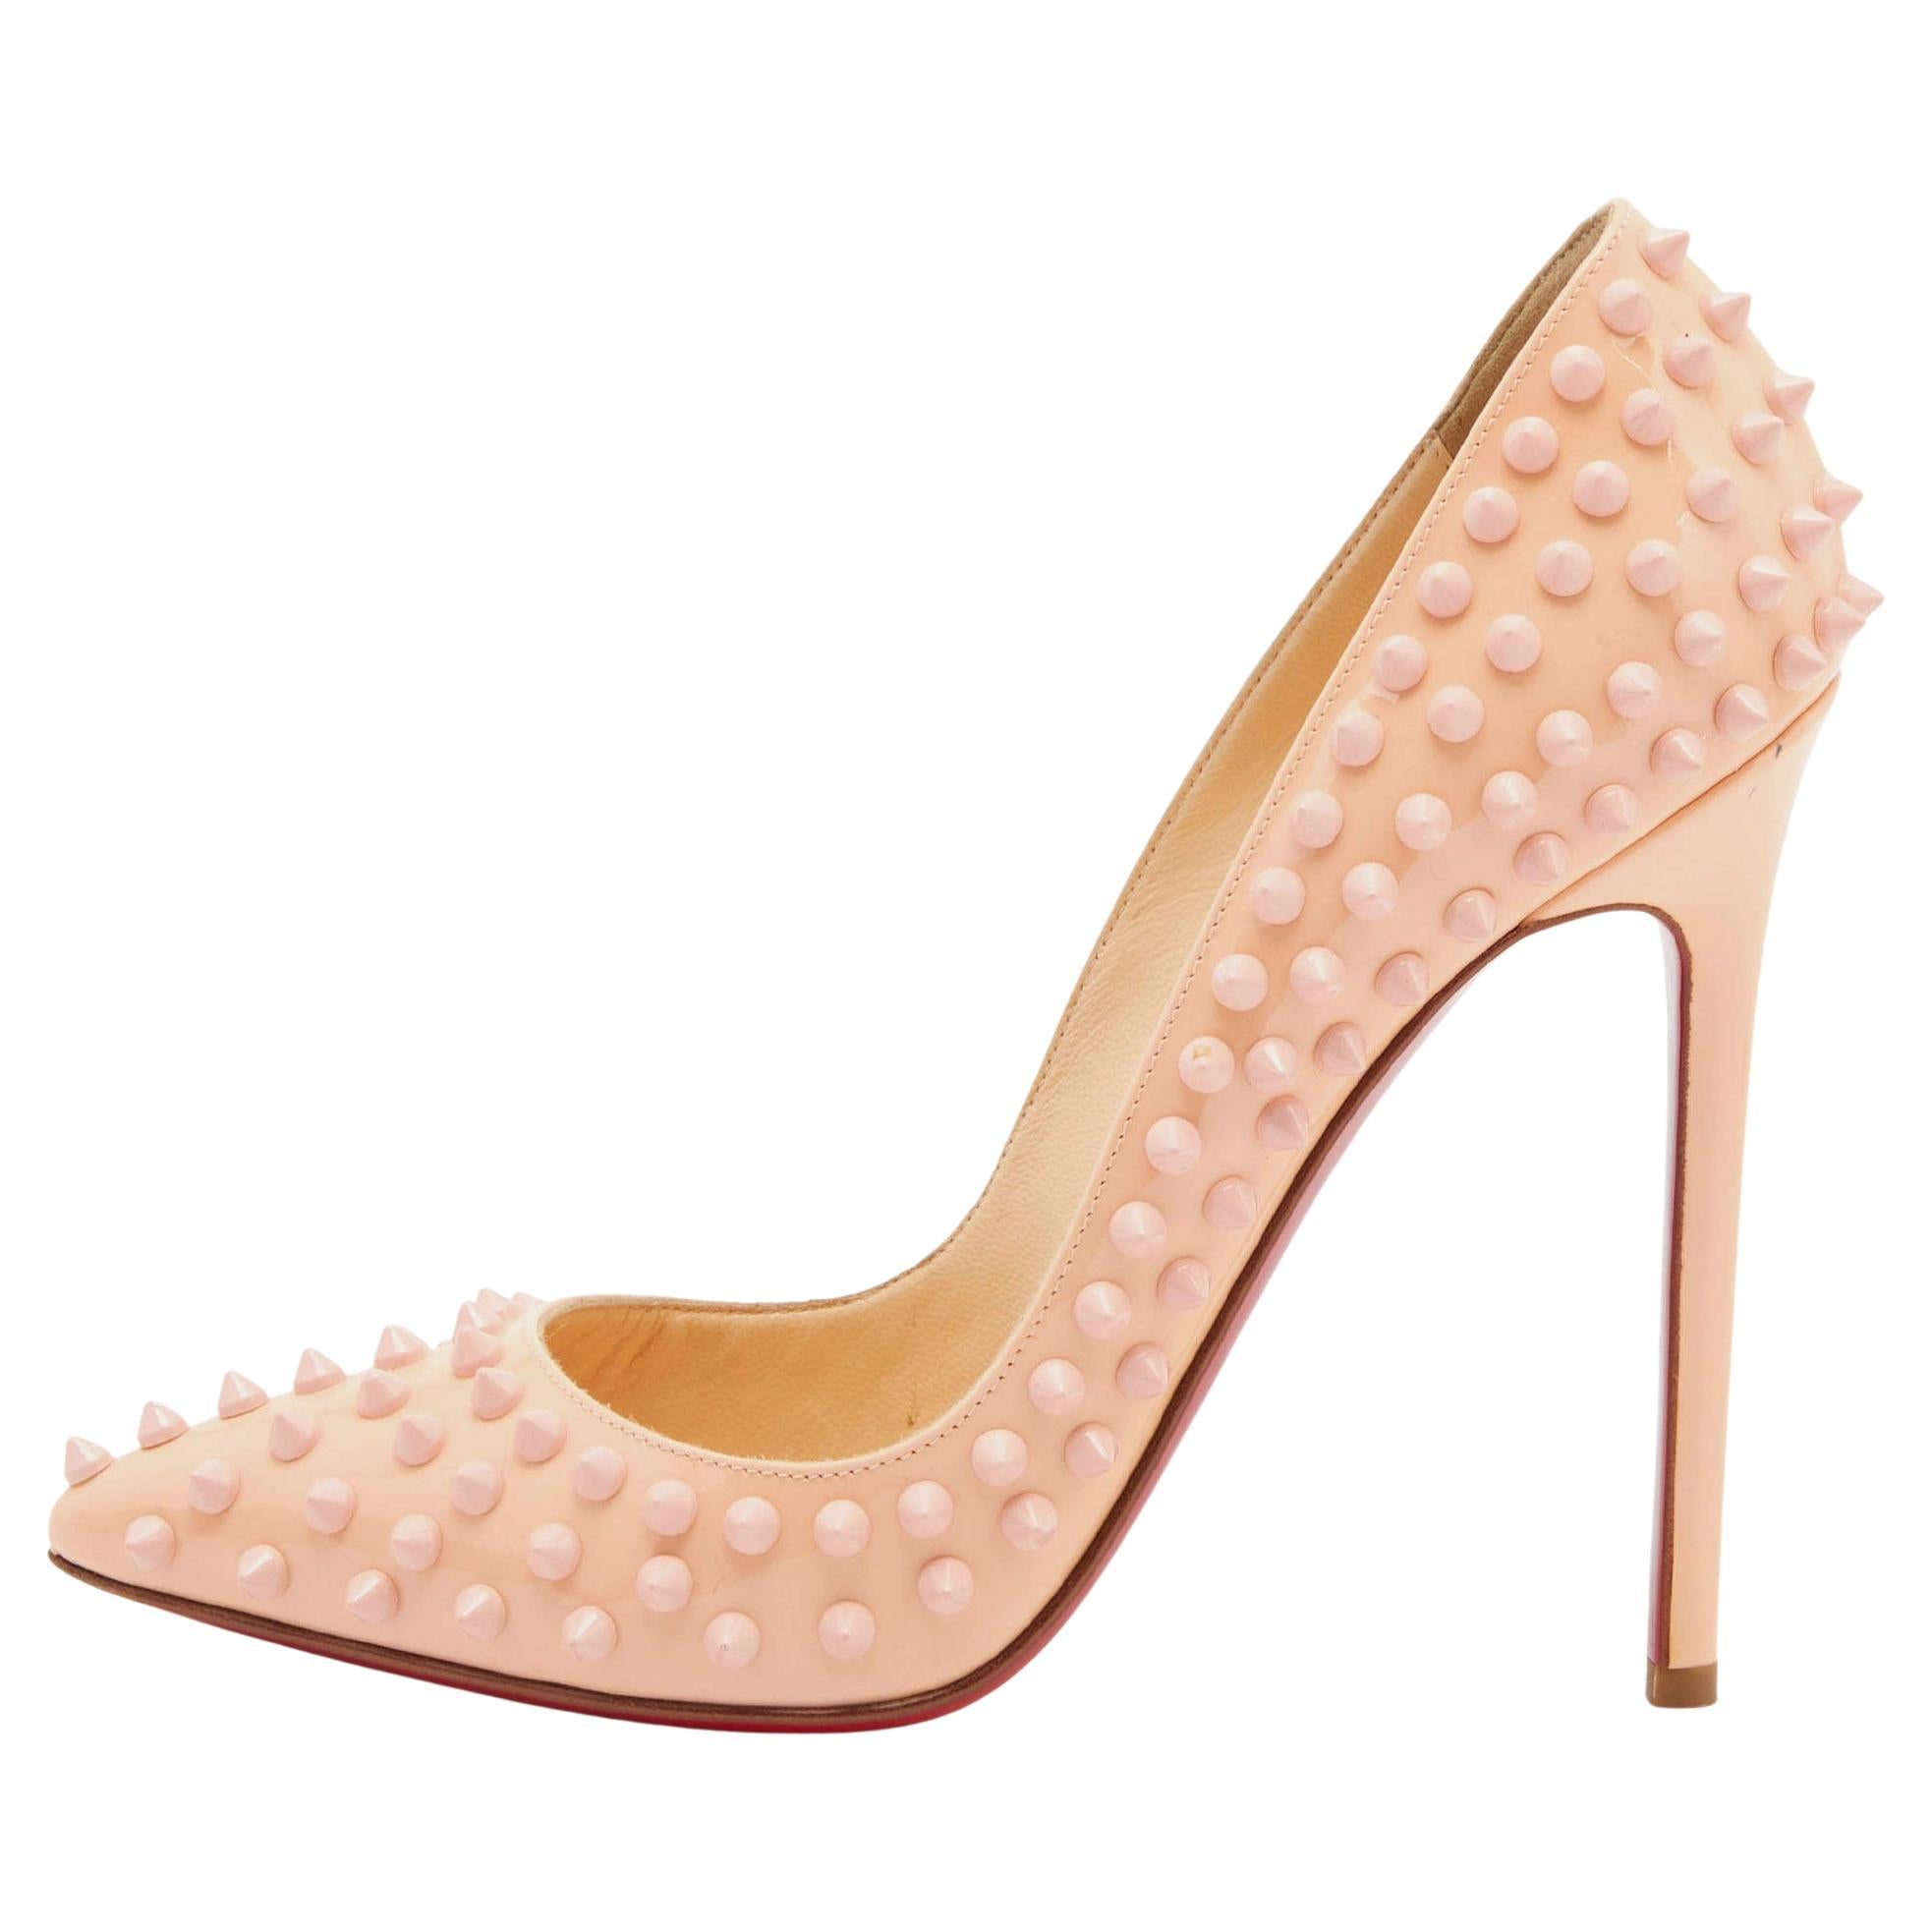 Christian Louboutin Peach Patent Leather Pigalle Spikes Pointed Toe Pumps Size 3